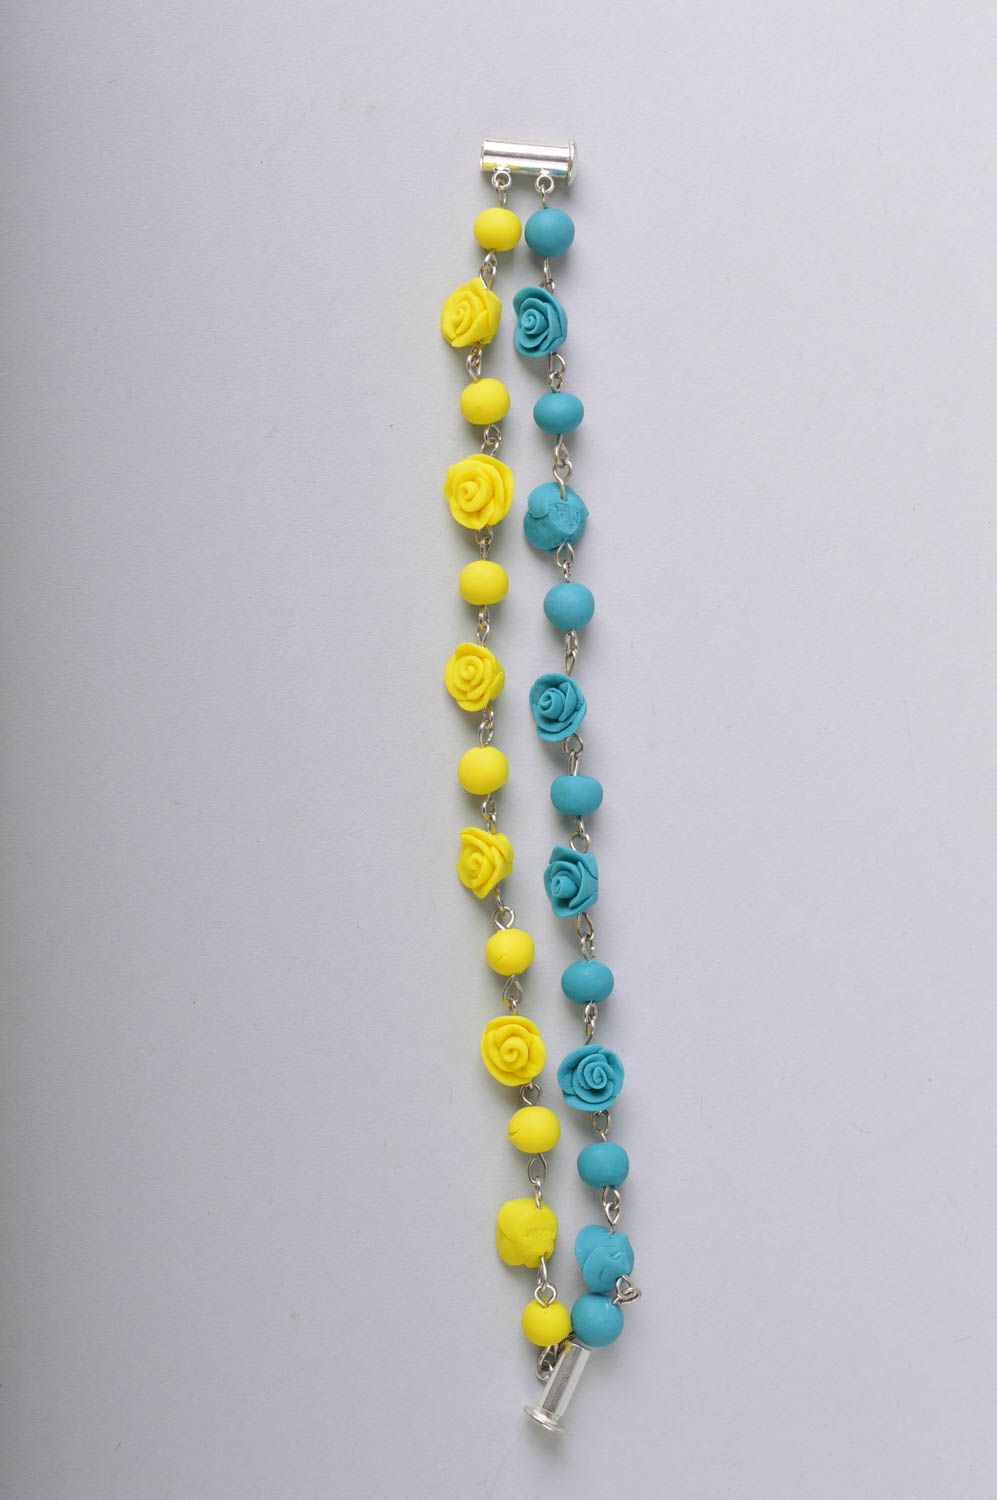 Handmade bright wrist bracelet with blue and yellow cold porcelain rose flowers photo 3